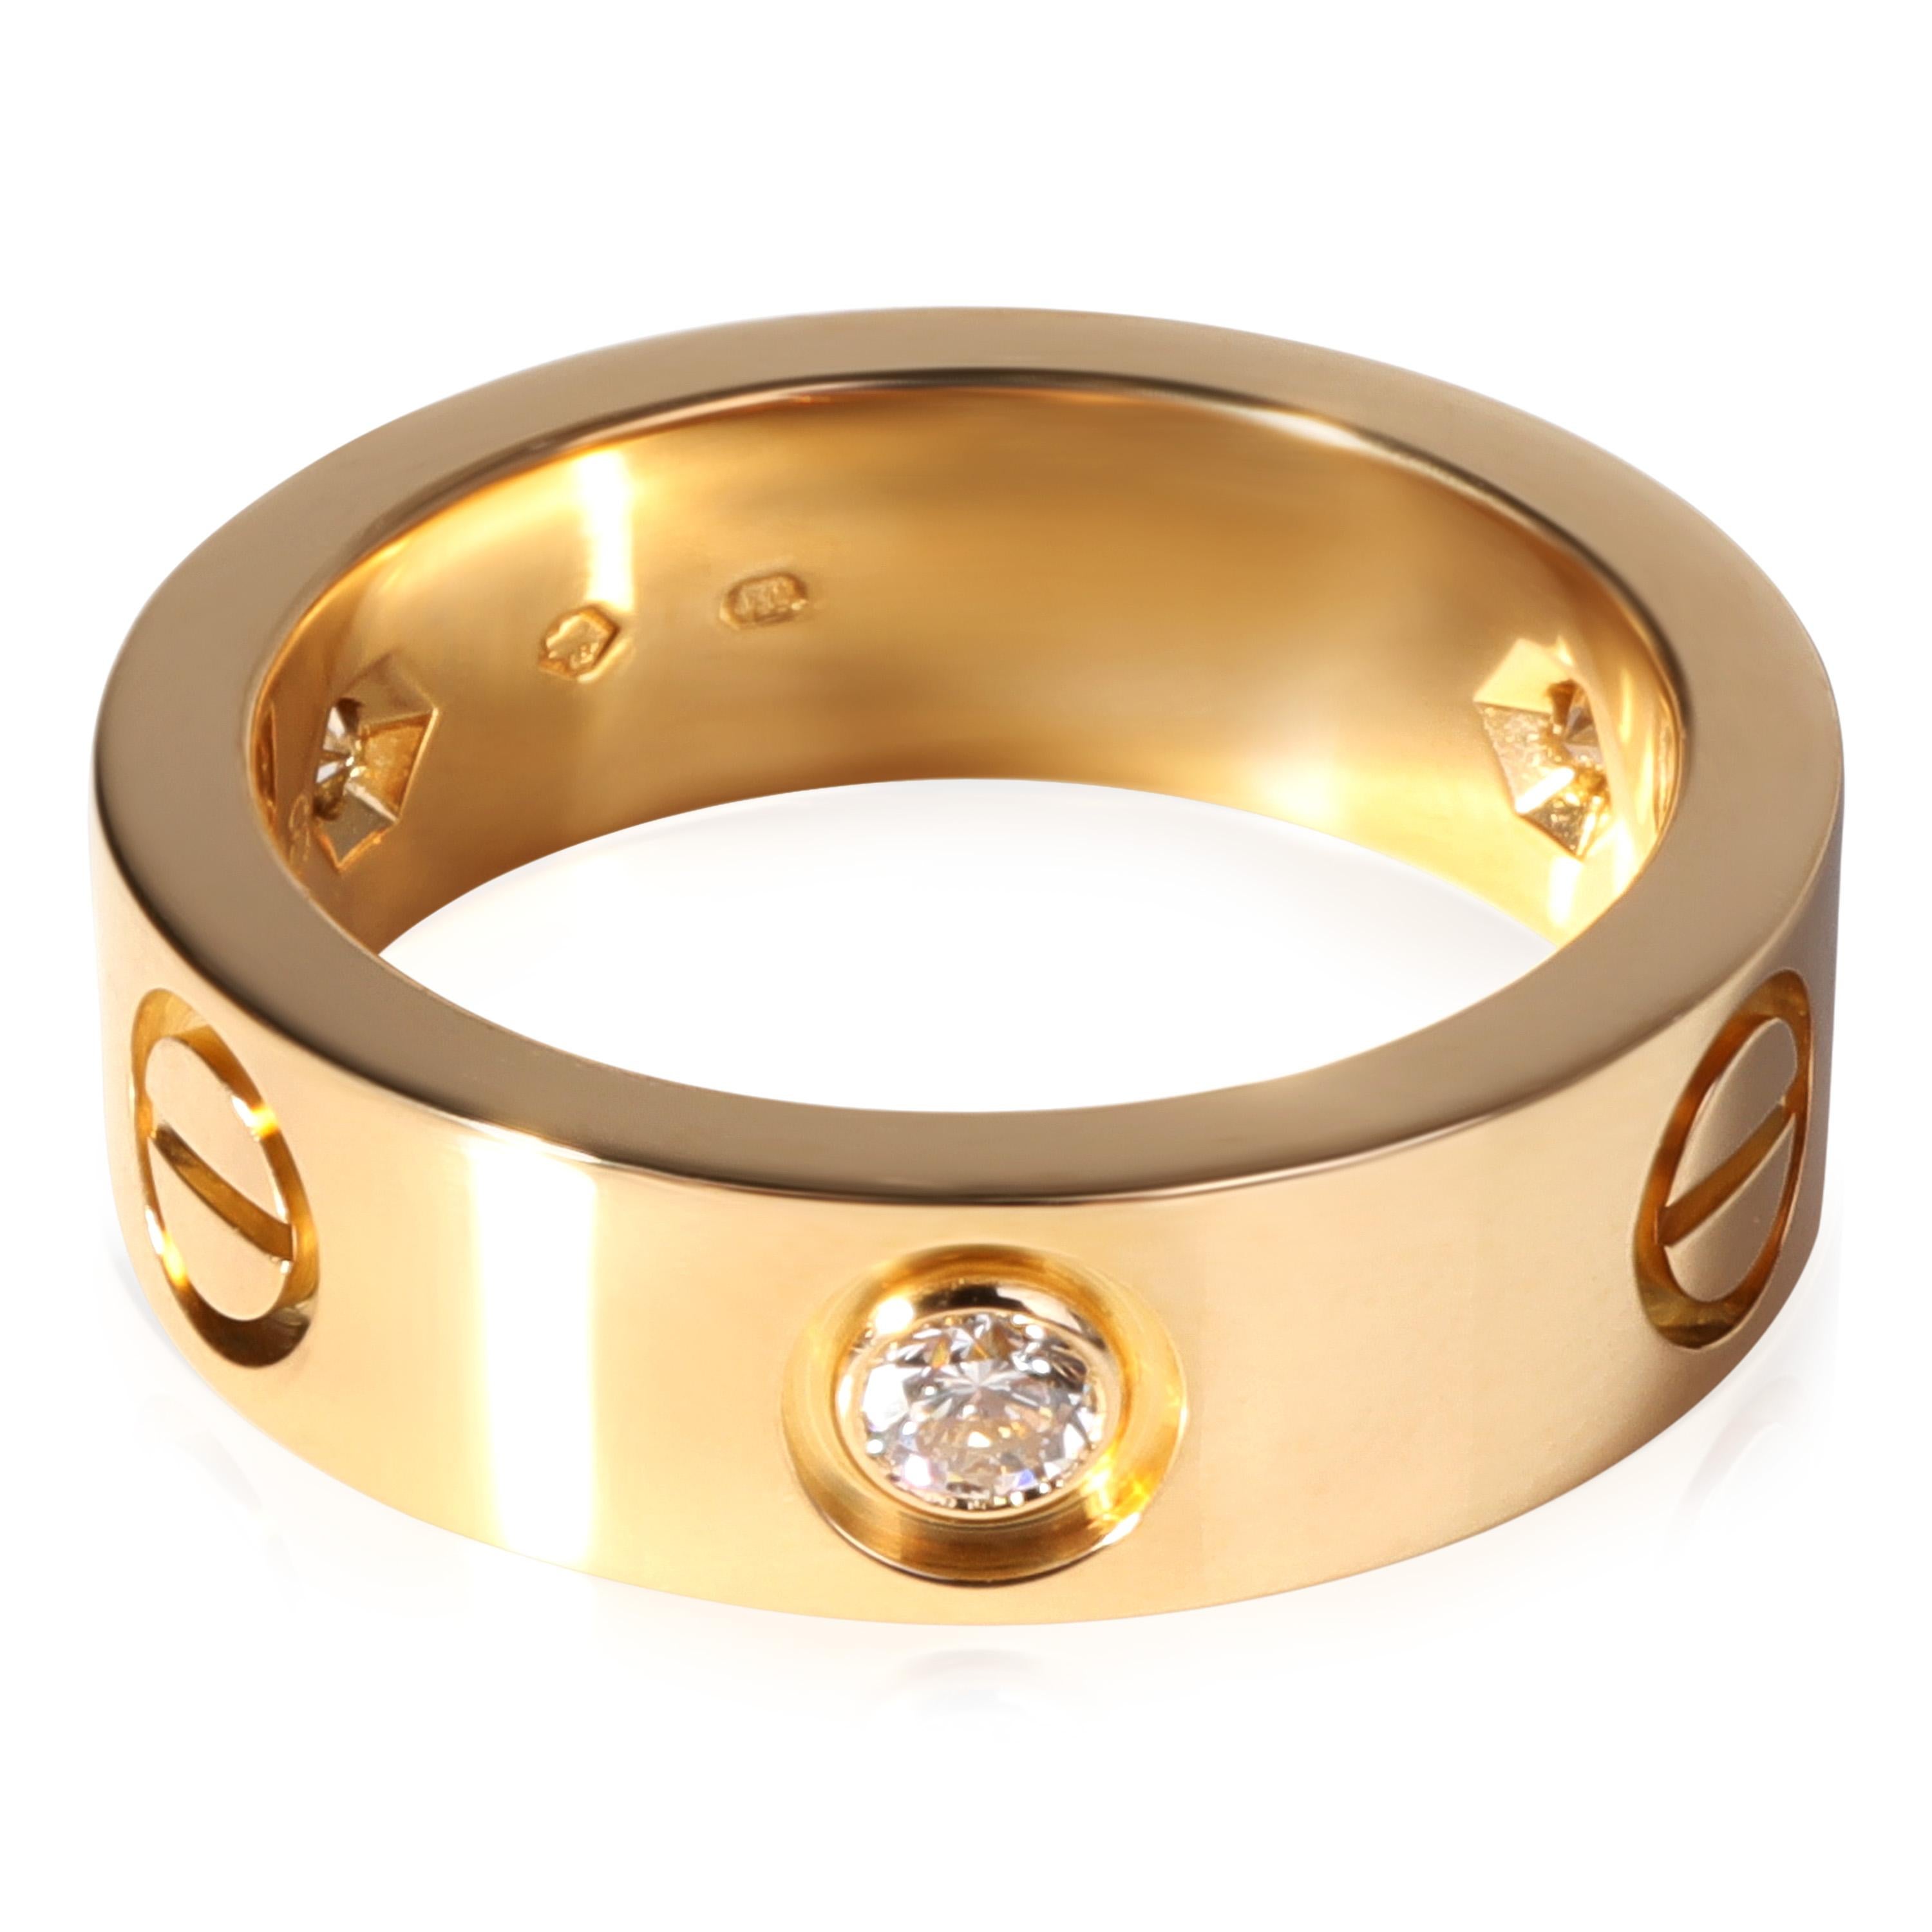 Cartier Love Diamond Ring in 18k Yellow Gold 0.22 CTW

PRIMARY DETAILS
SKU: 119833
Listing Title: Cartier Love Diamond Ring in 18k Yellow Gold 0.22 CTW
Condition Description: Retails for 3,850 USD. In excellent condition and recently polished. The